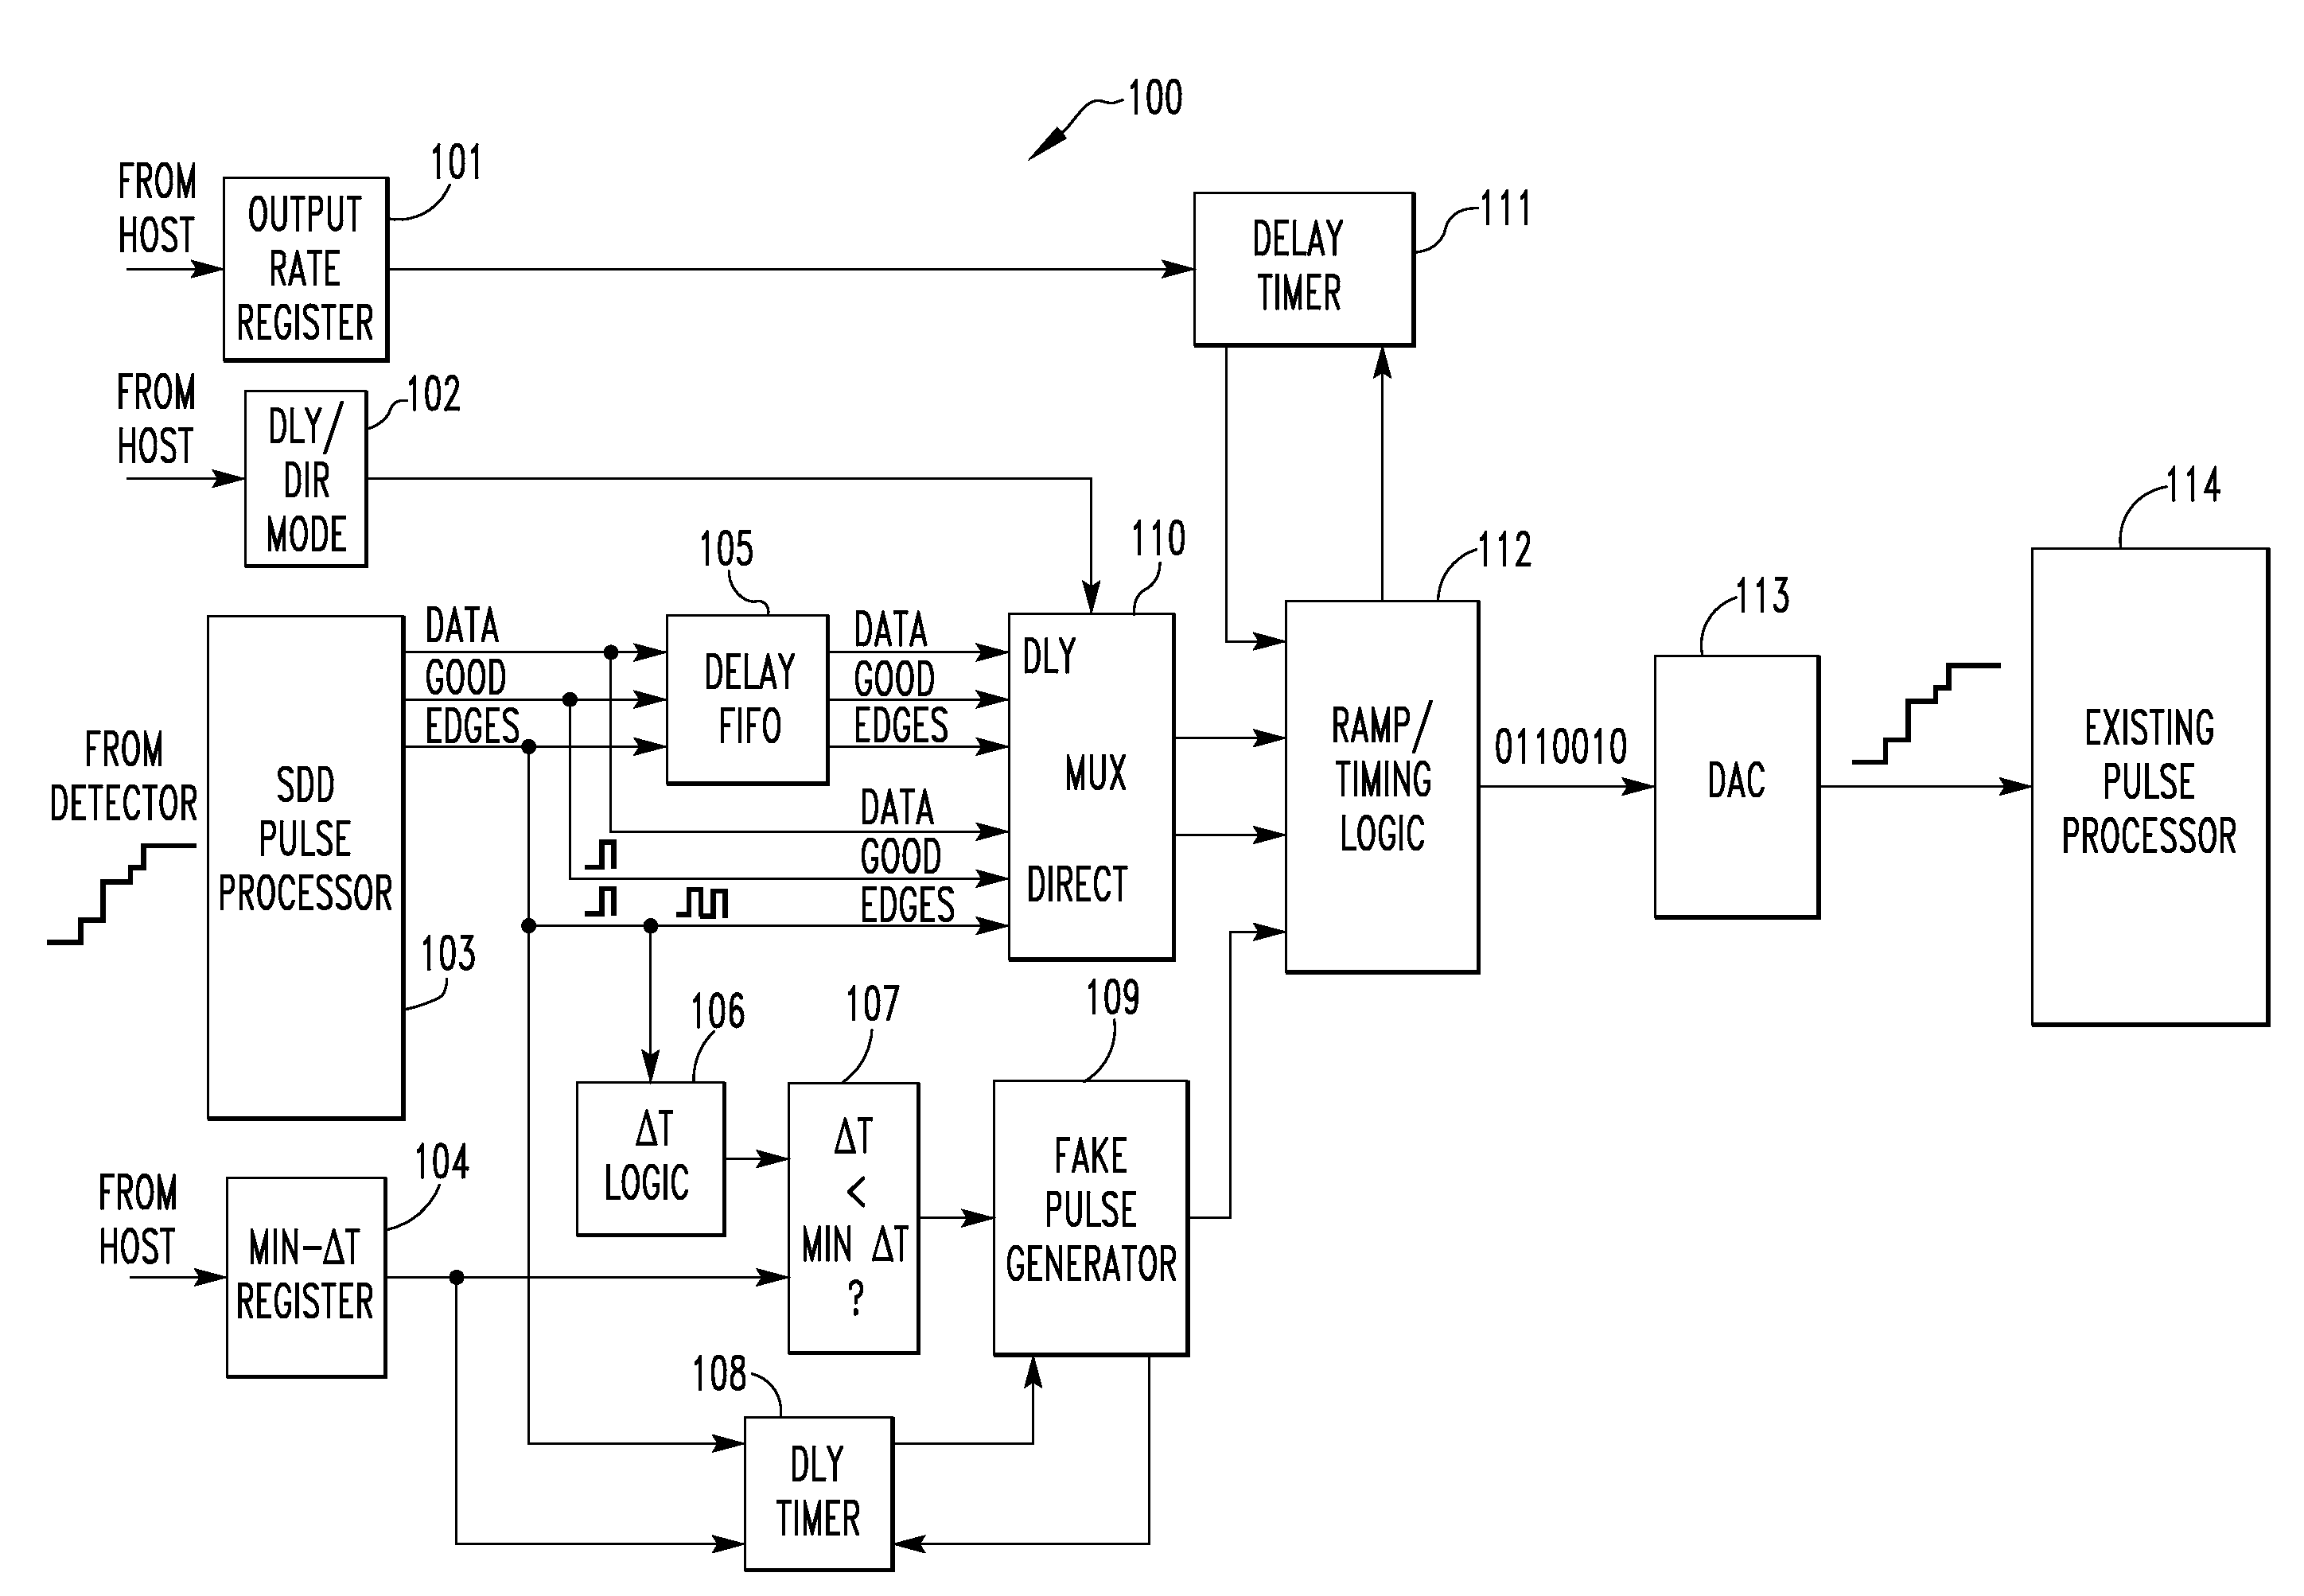 Adapting a high-performance pulse processor to an existing spectrometry system